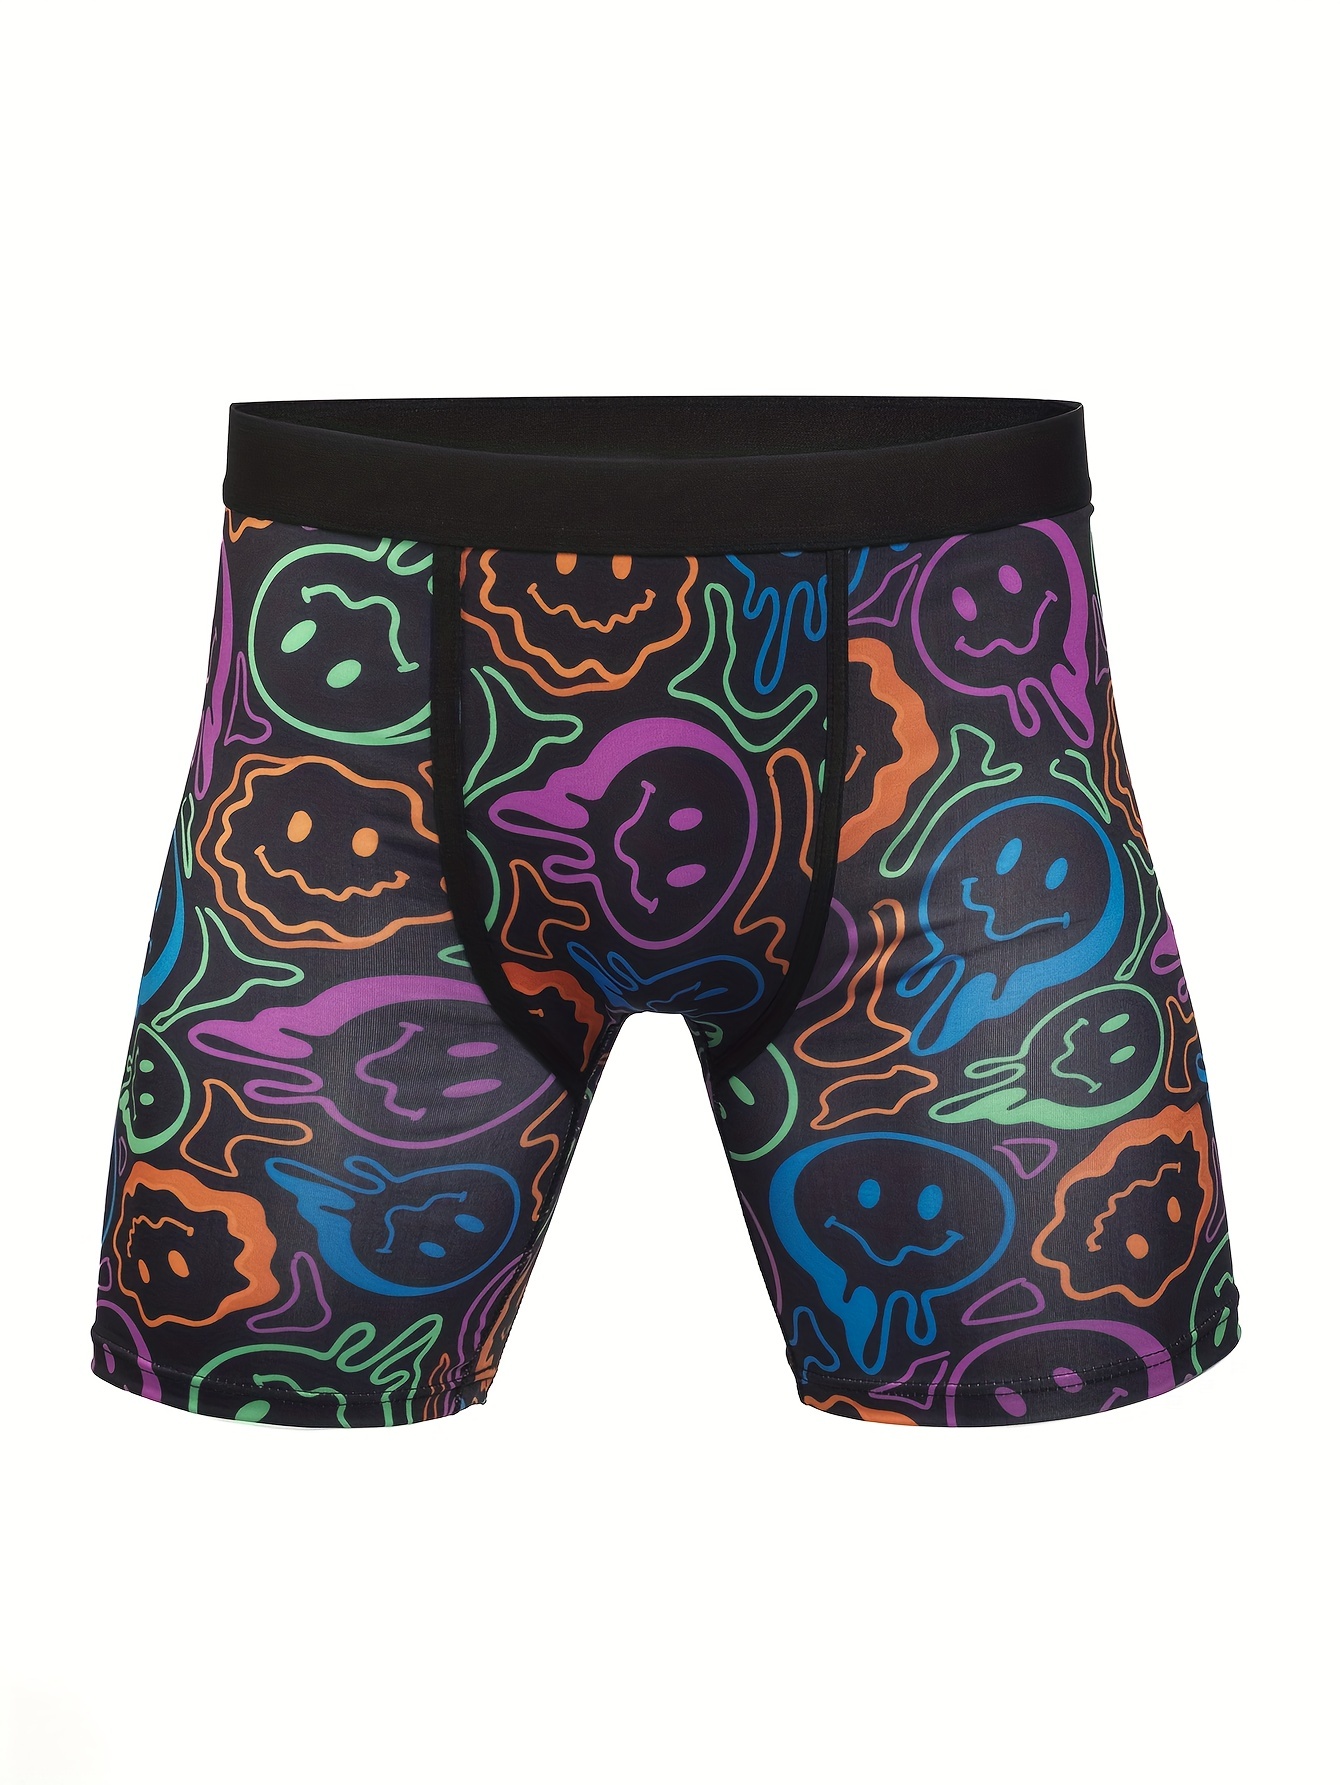 Youth All Seeing Eye Printed Boxer Shorts, Mens Sports Underwear